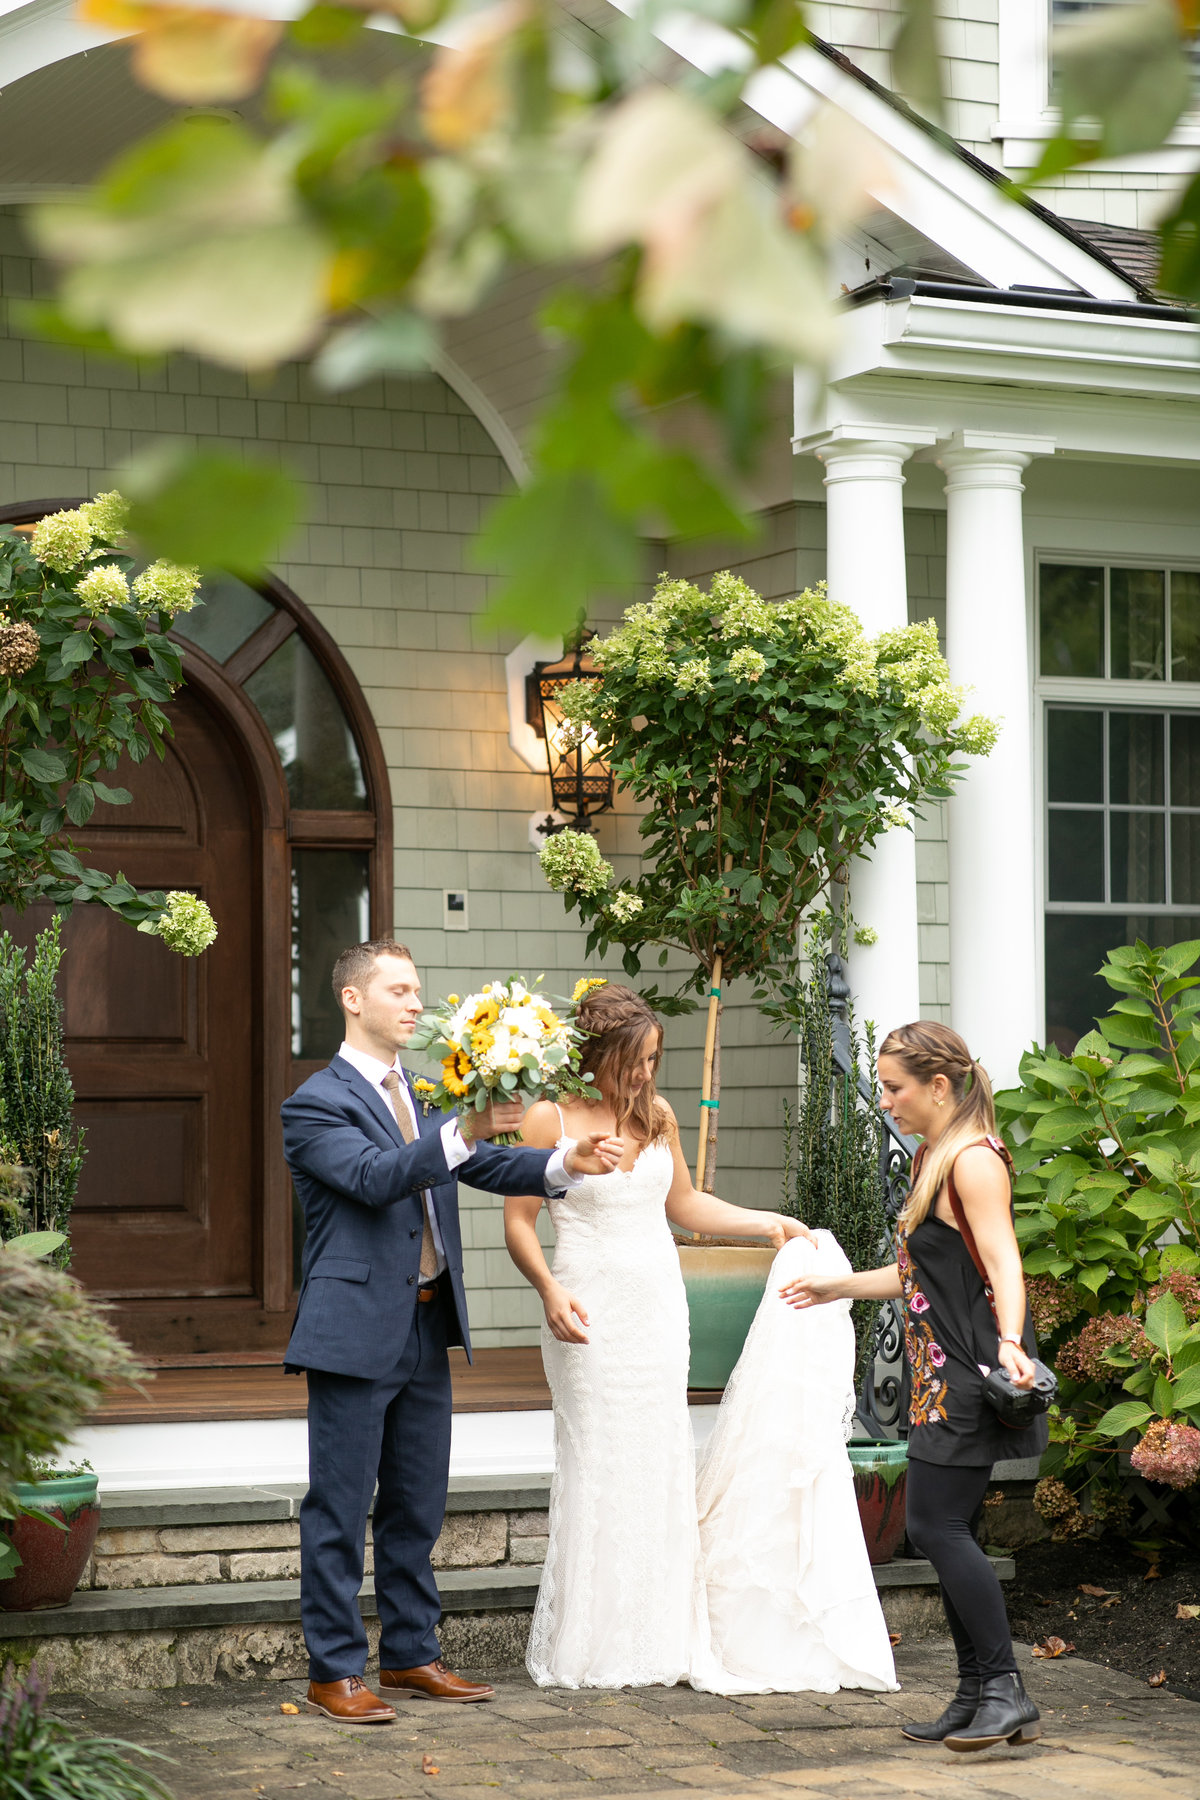 Ashley Mac Photographs - New Jersey Weddings - Behind the Scenes of a Wedding - BTS-59